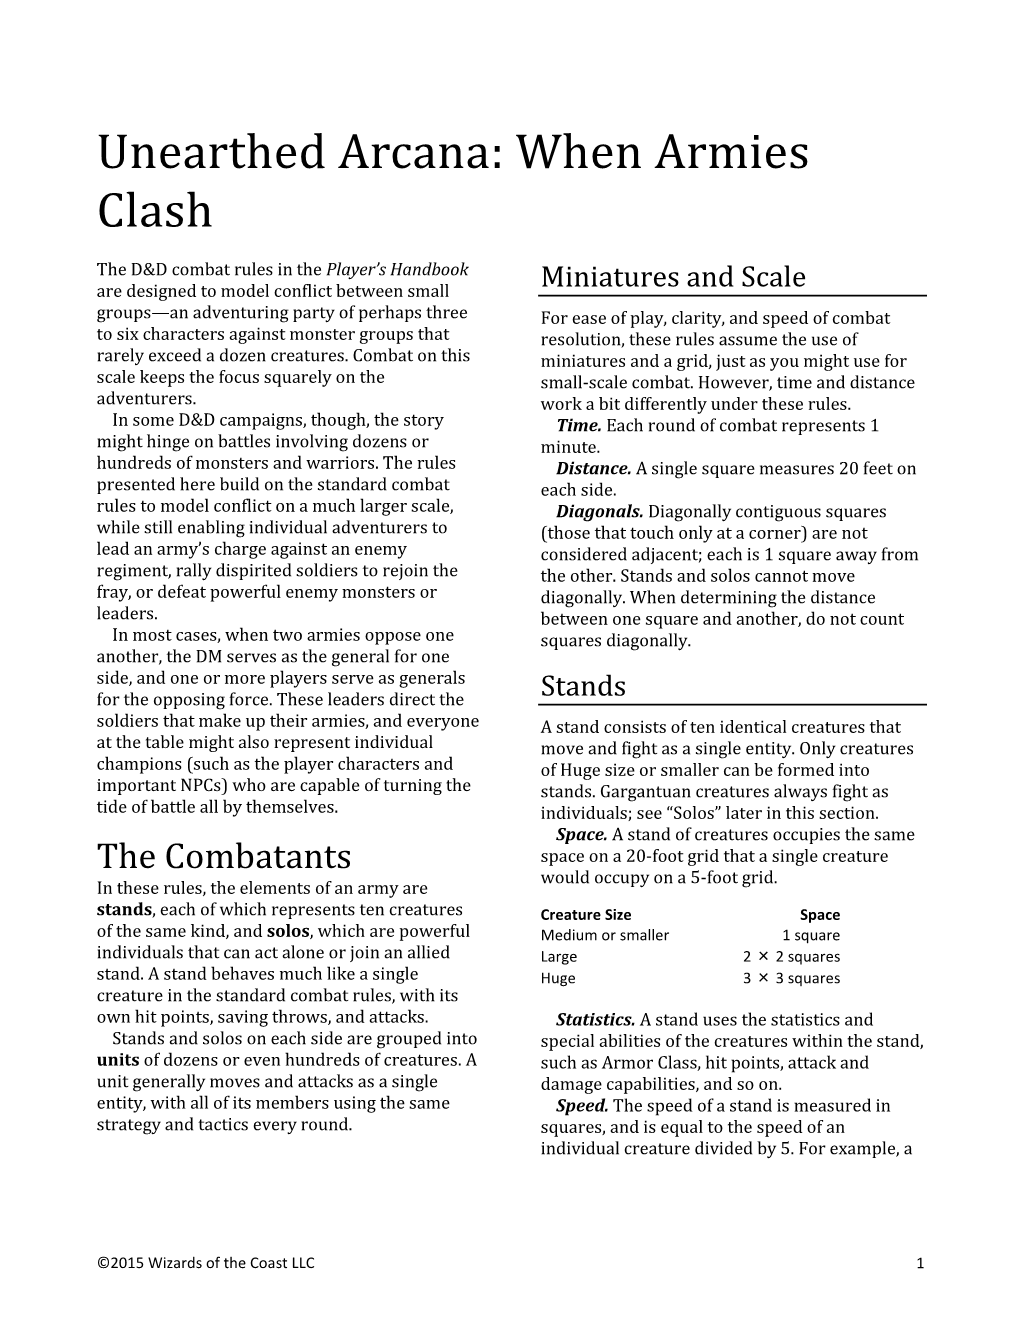 Unearthed Arcana: When Armies Clash